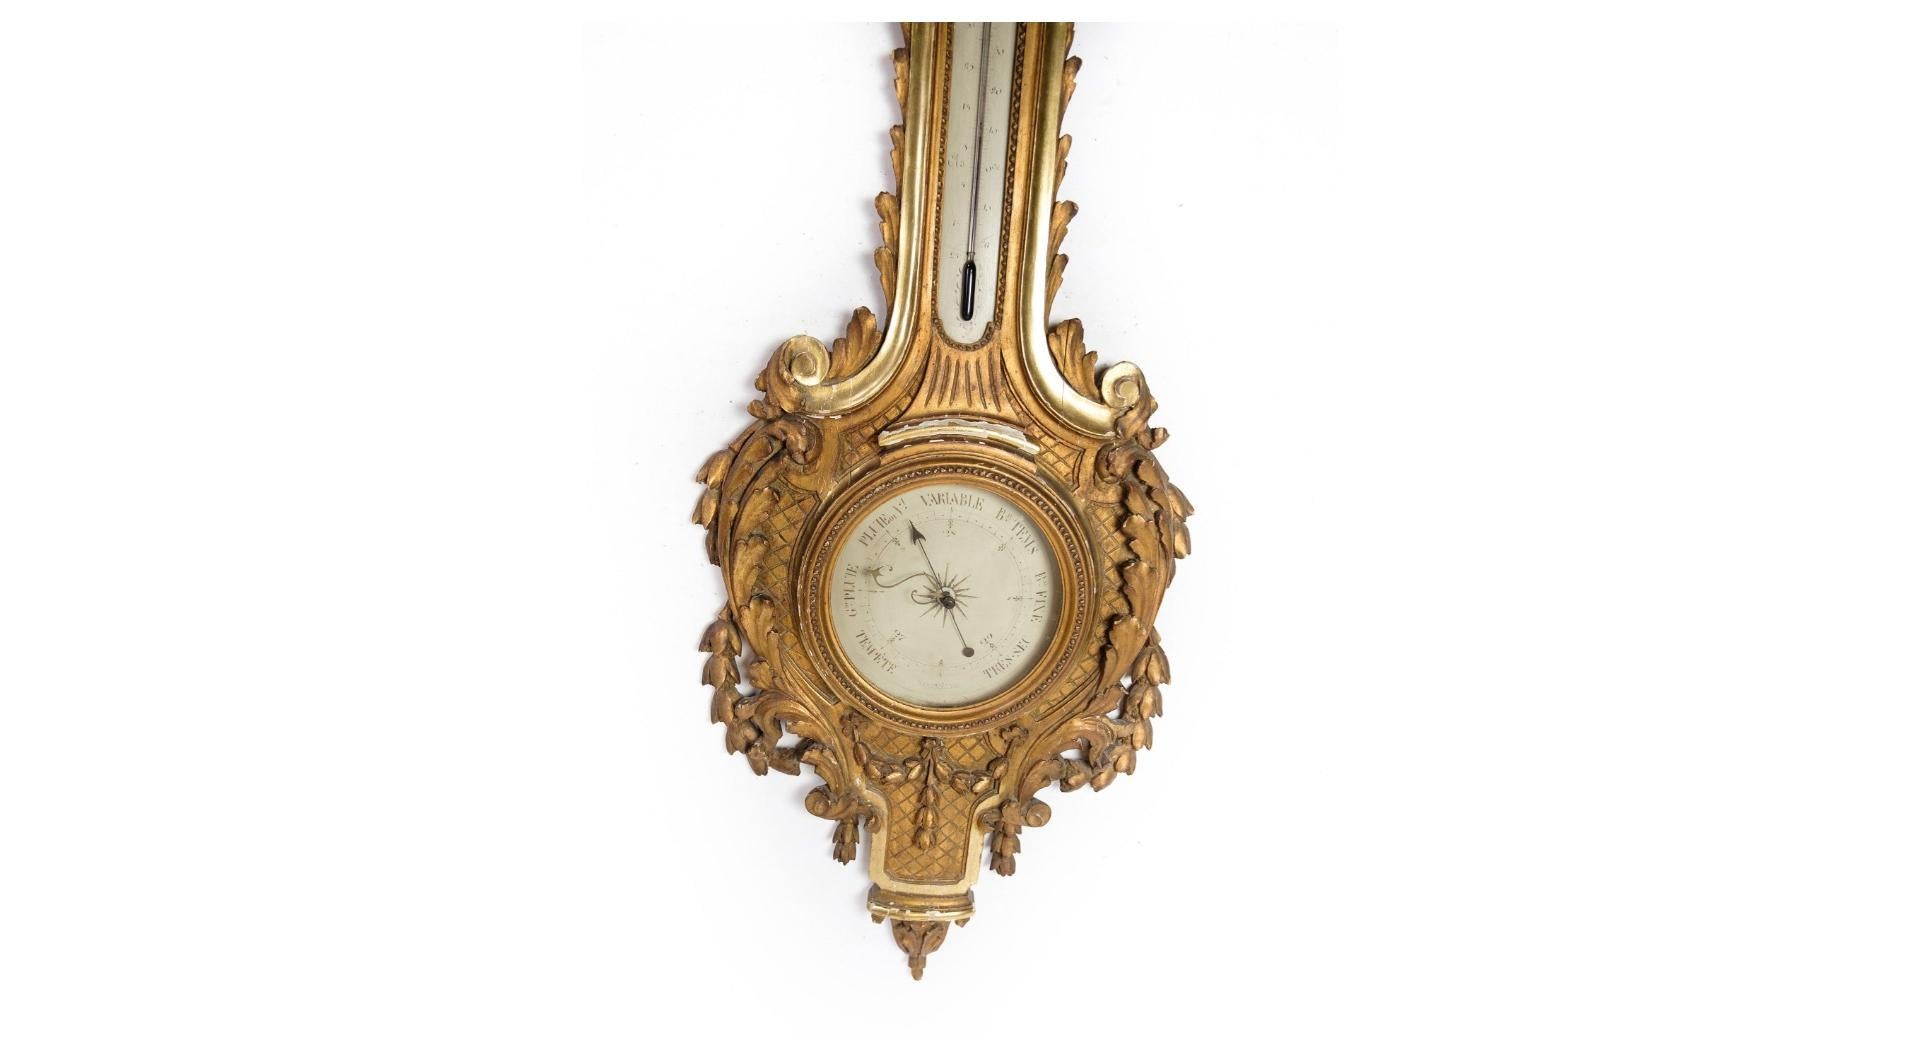 A Louis XVI French barometer adorned with intricate carvings and original gilding, dating back to the late 1700s. This exquisite piece stands as a testament to the opulence and craftsmanship of the period, showcasing unparalleled beauty and